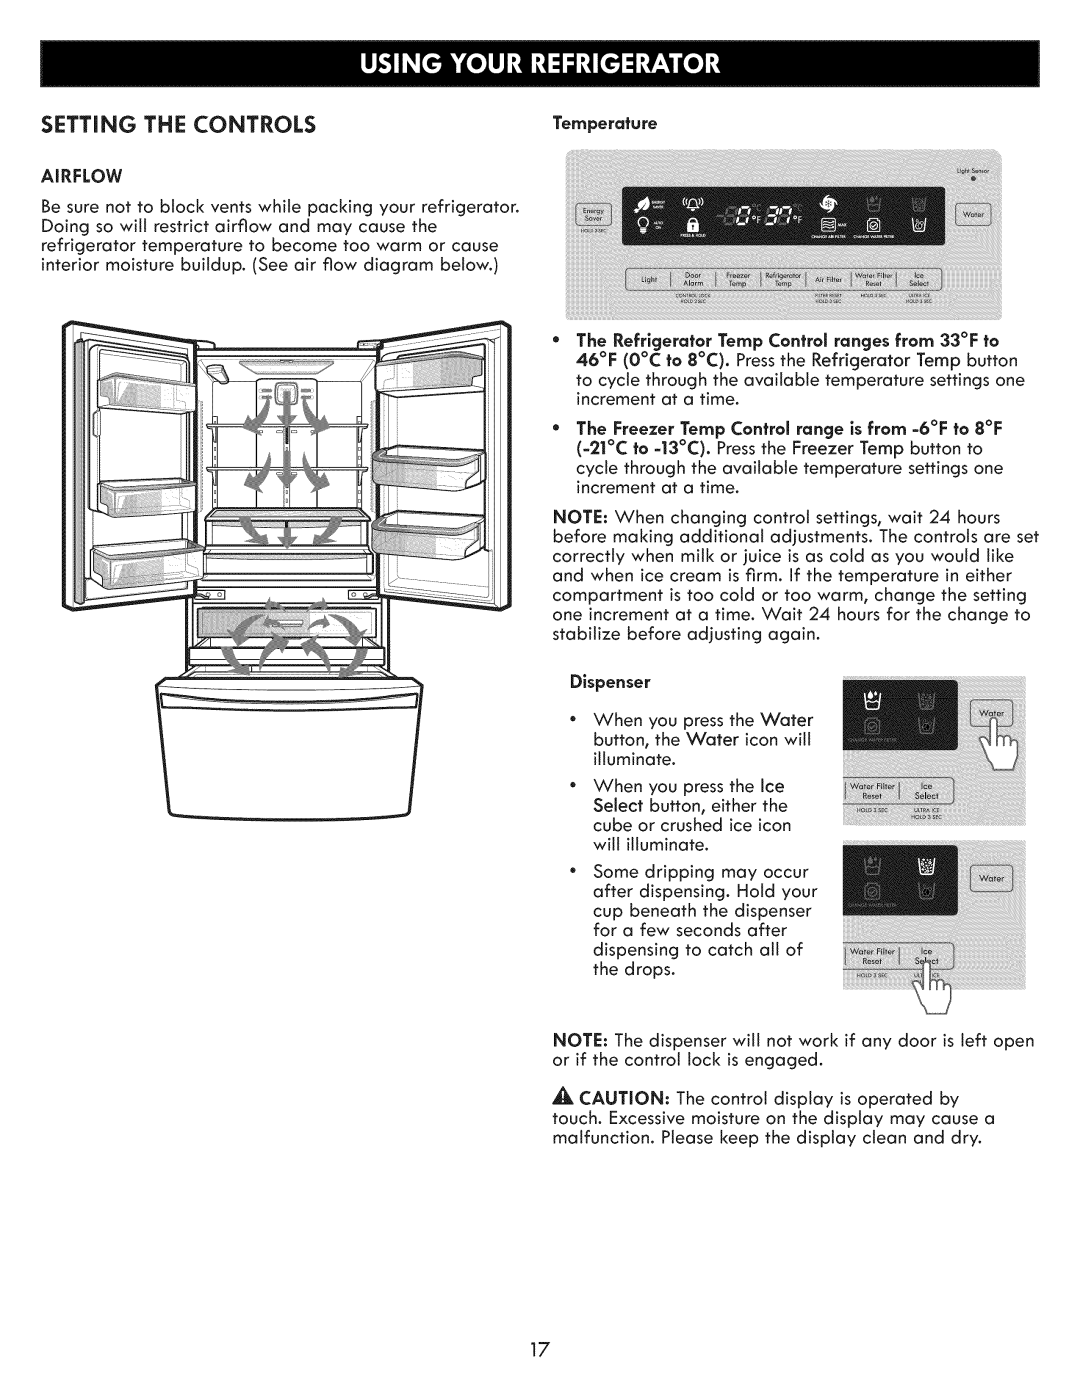 Kenmore 795.7205 manual Setting The Controls, Airflow, The Refrigerator Temp Control ranges from 33F to 